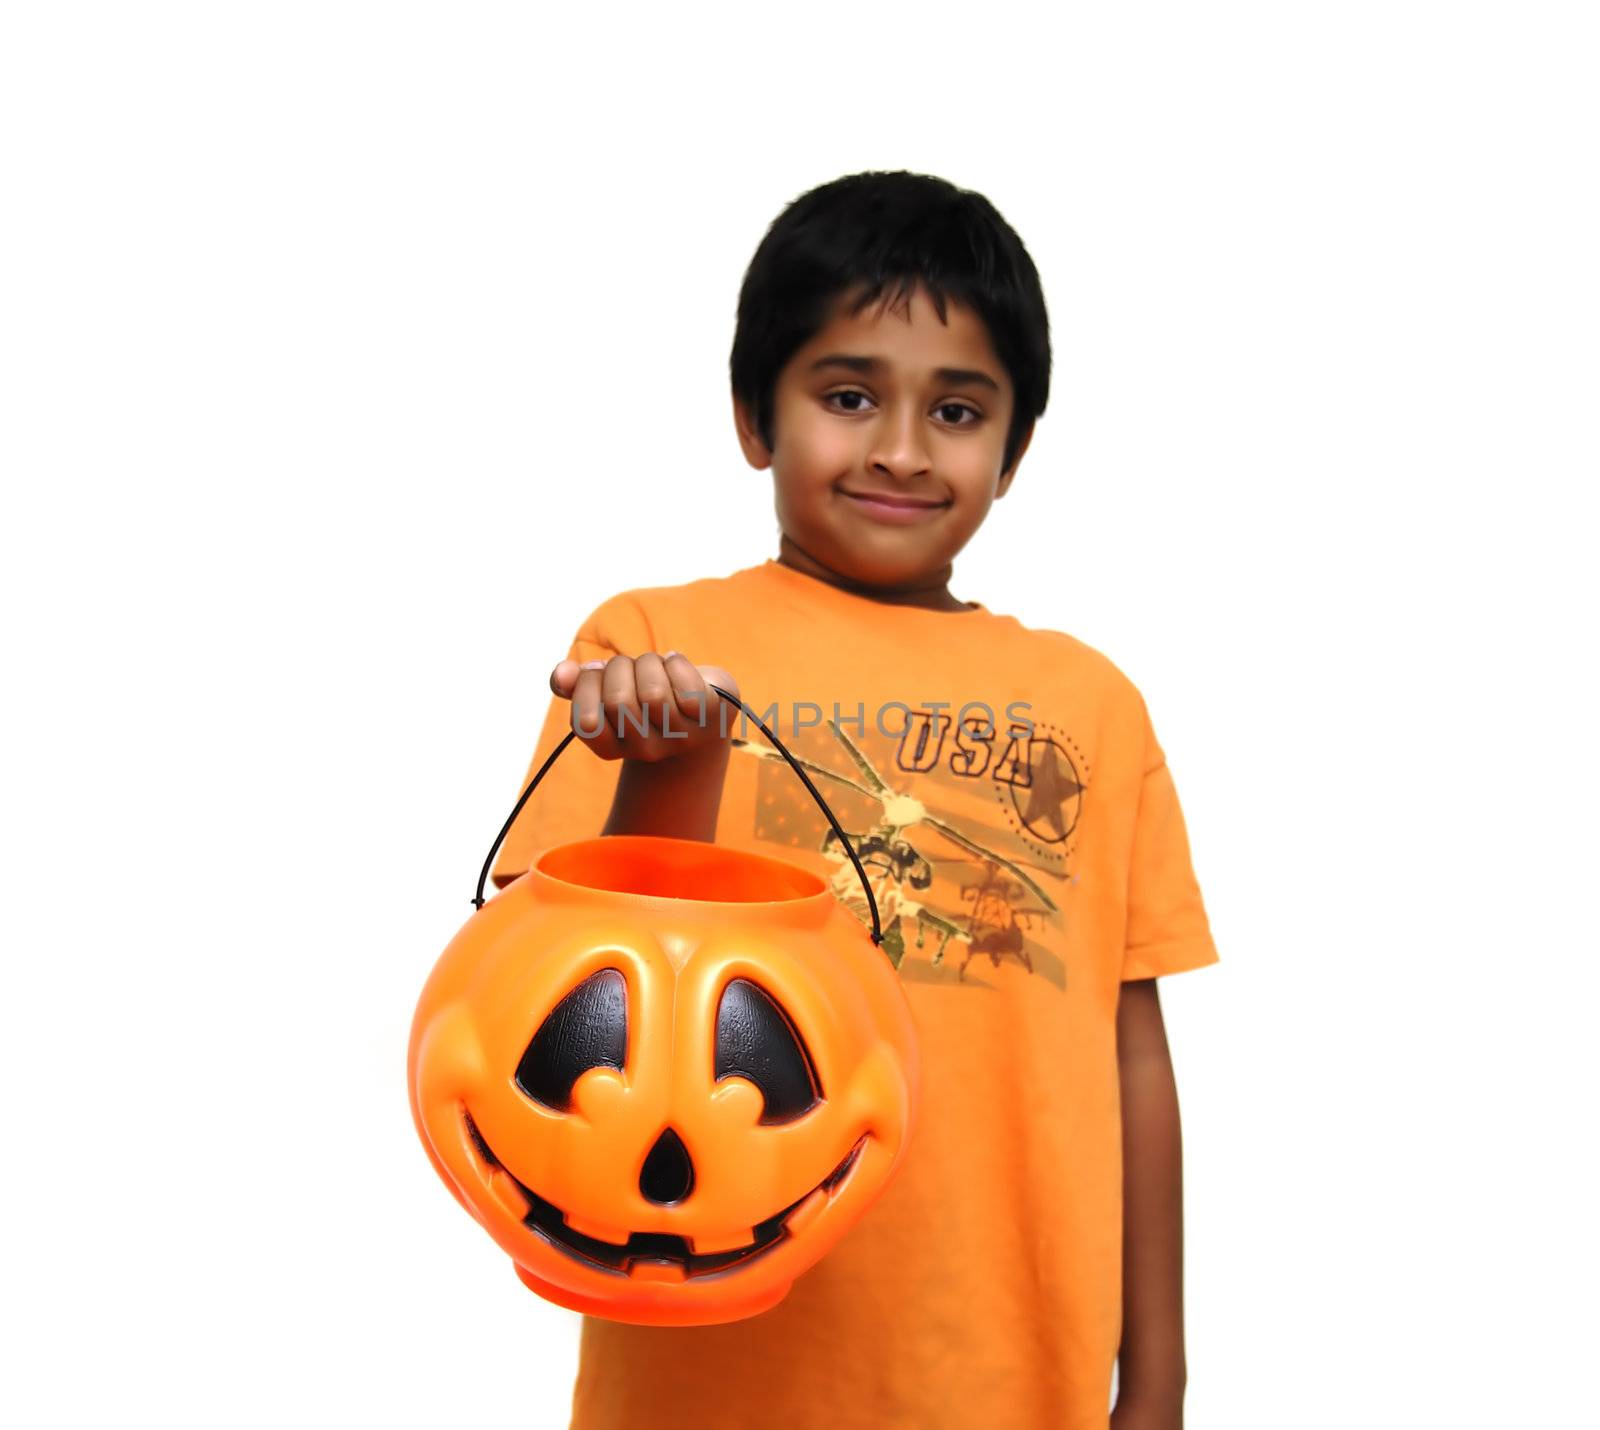 An handsome Indian child holding a candy cart for trick or treat